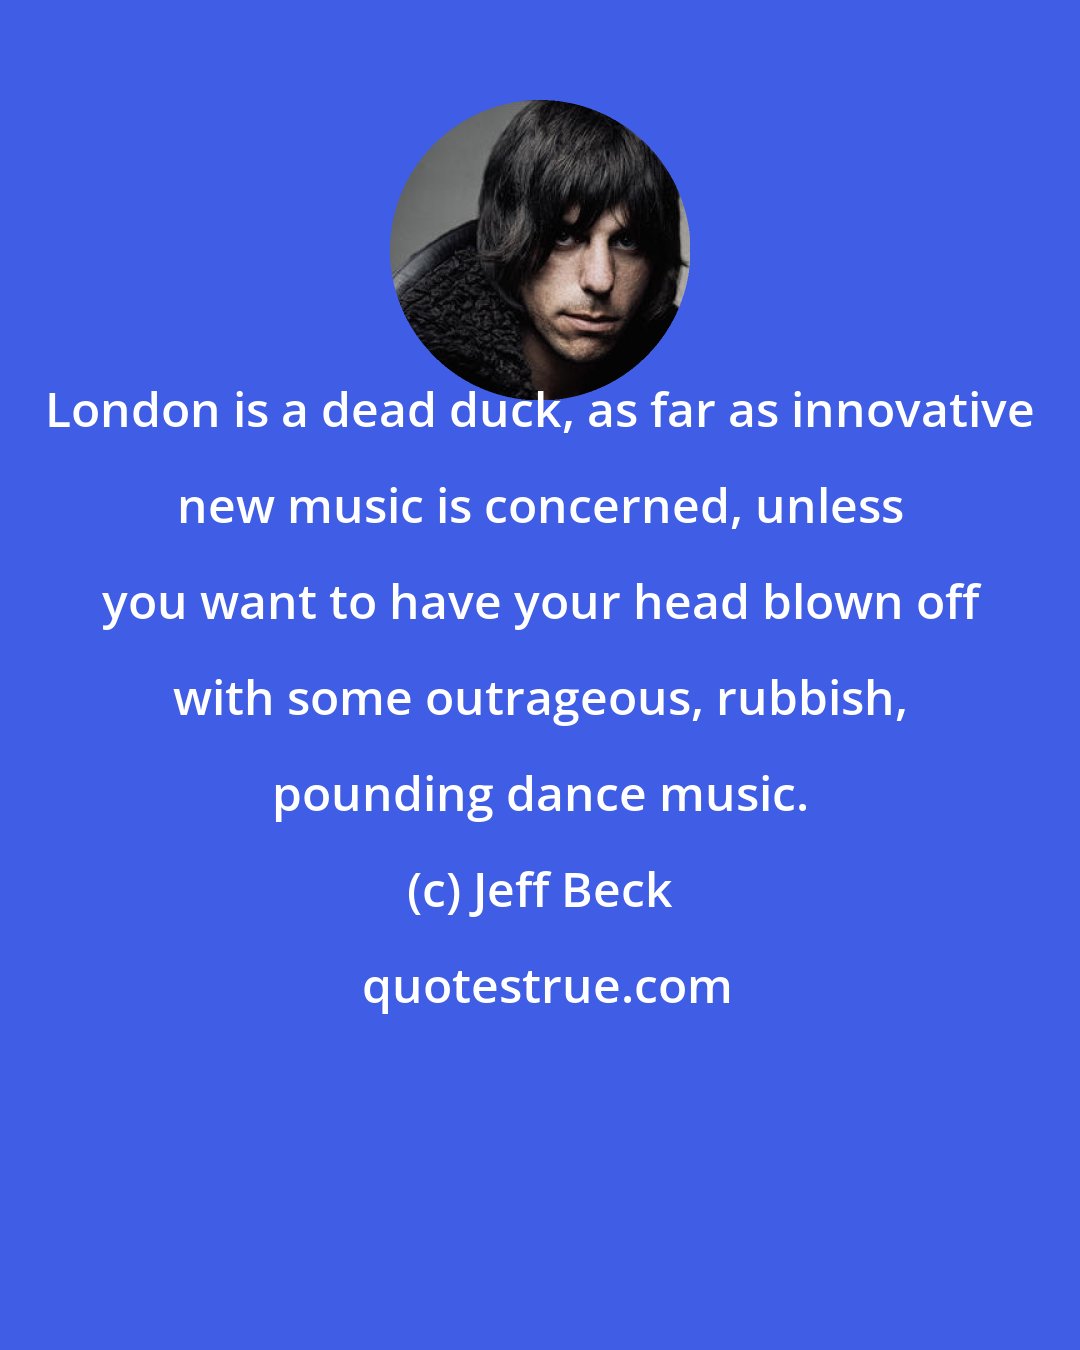 Jeff Beck: London is a dead duck, as far as innovative new music is concerned, unless you want to have your head blown off with some outrageous, rubbish, pounding dance music.